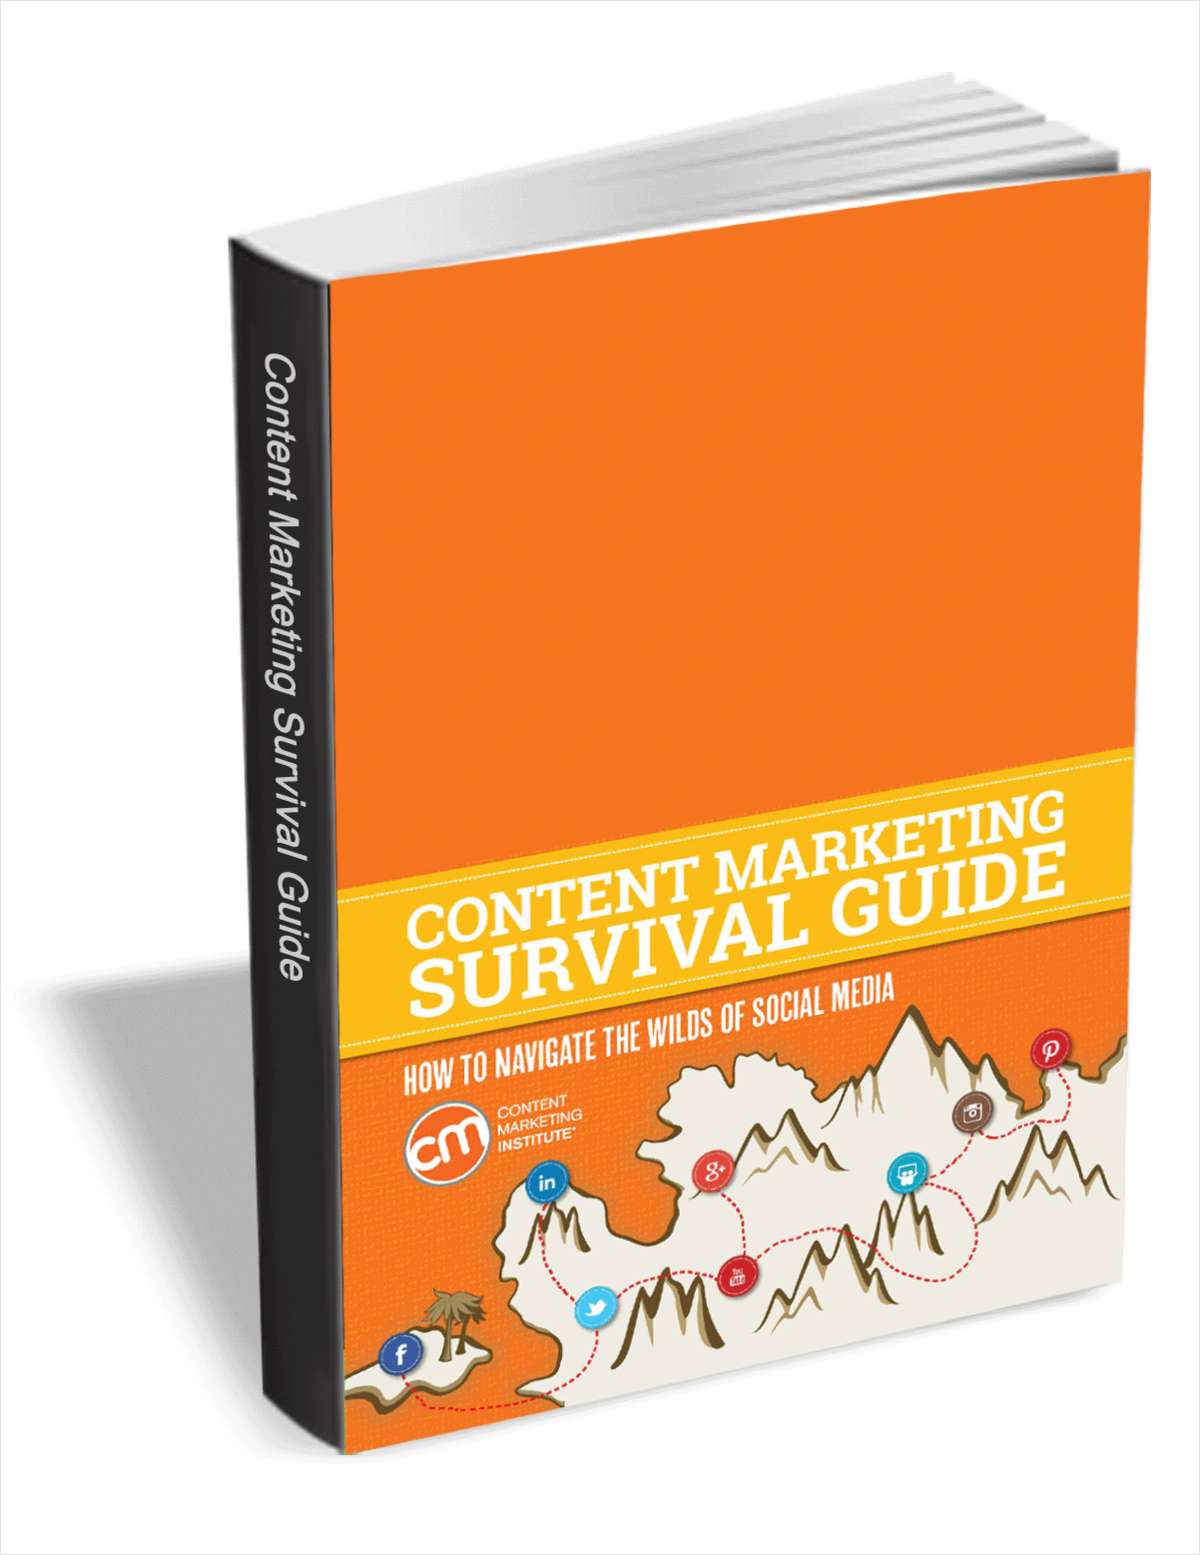 The Content Marketing Survival Guide: How to Navigate the Wilds of Social Media